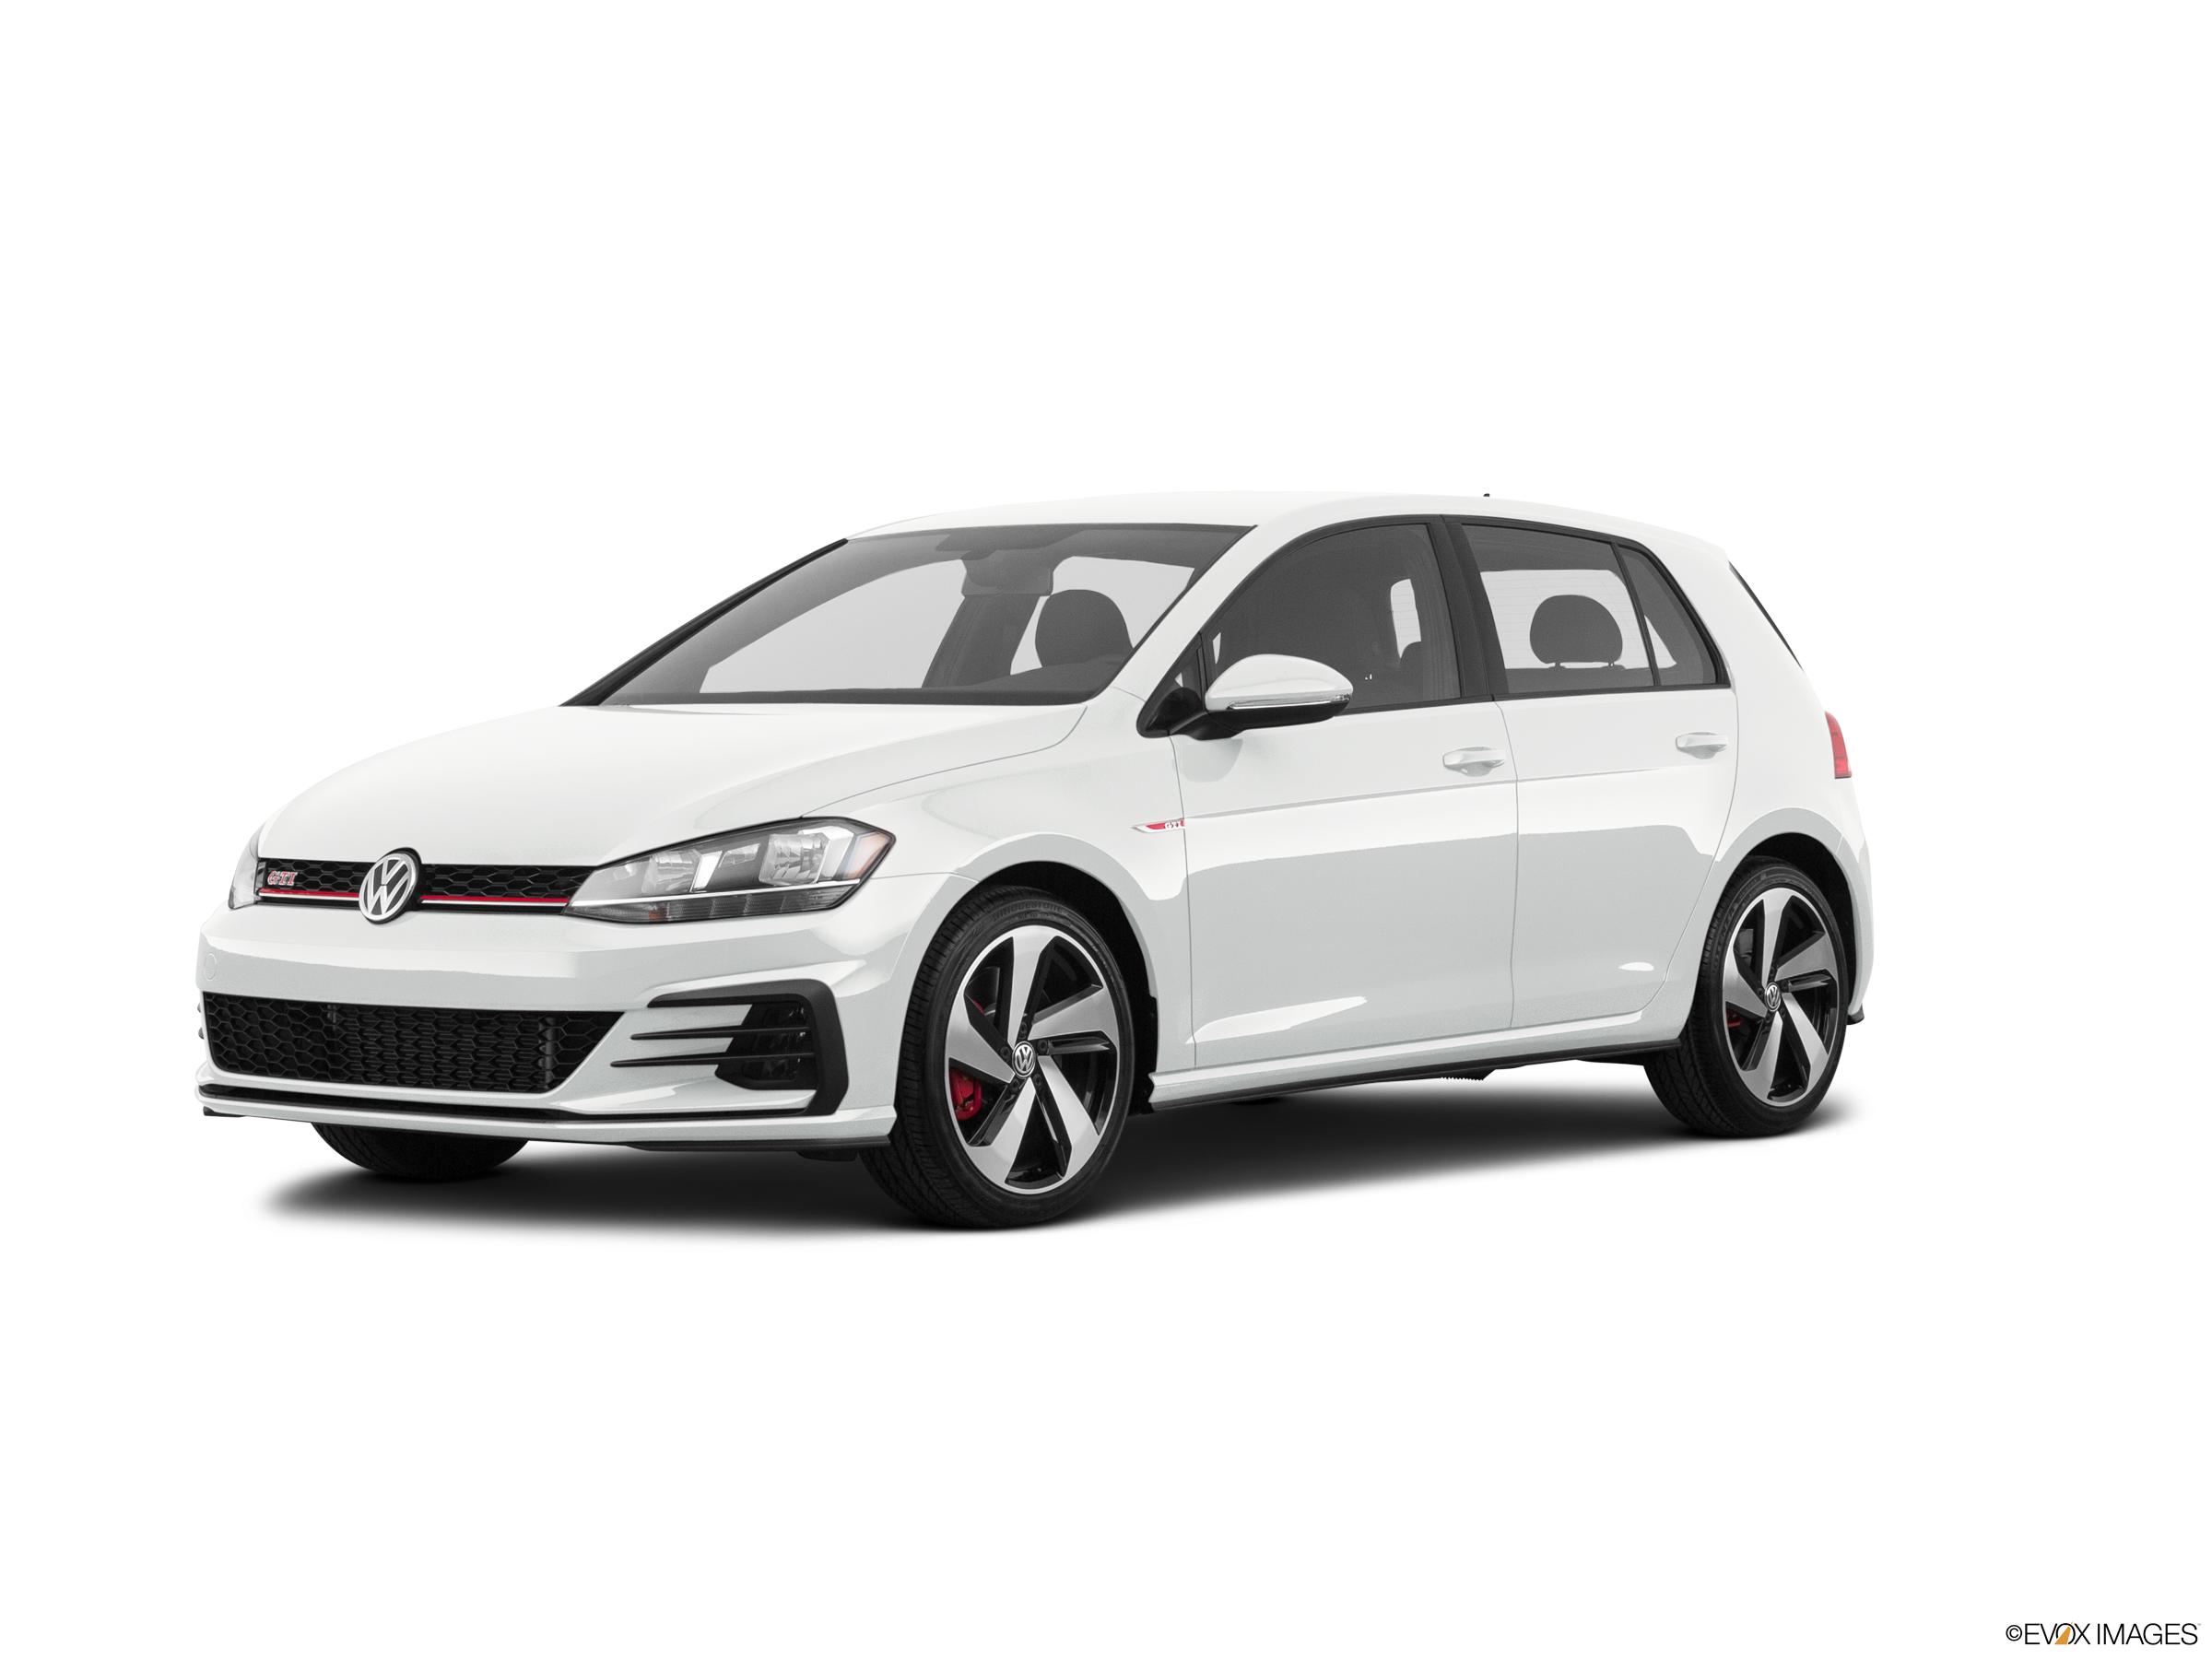 Volkswagen Golf Gti Prices Reviews Pictures Kelley Blue Book